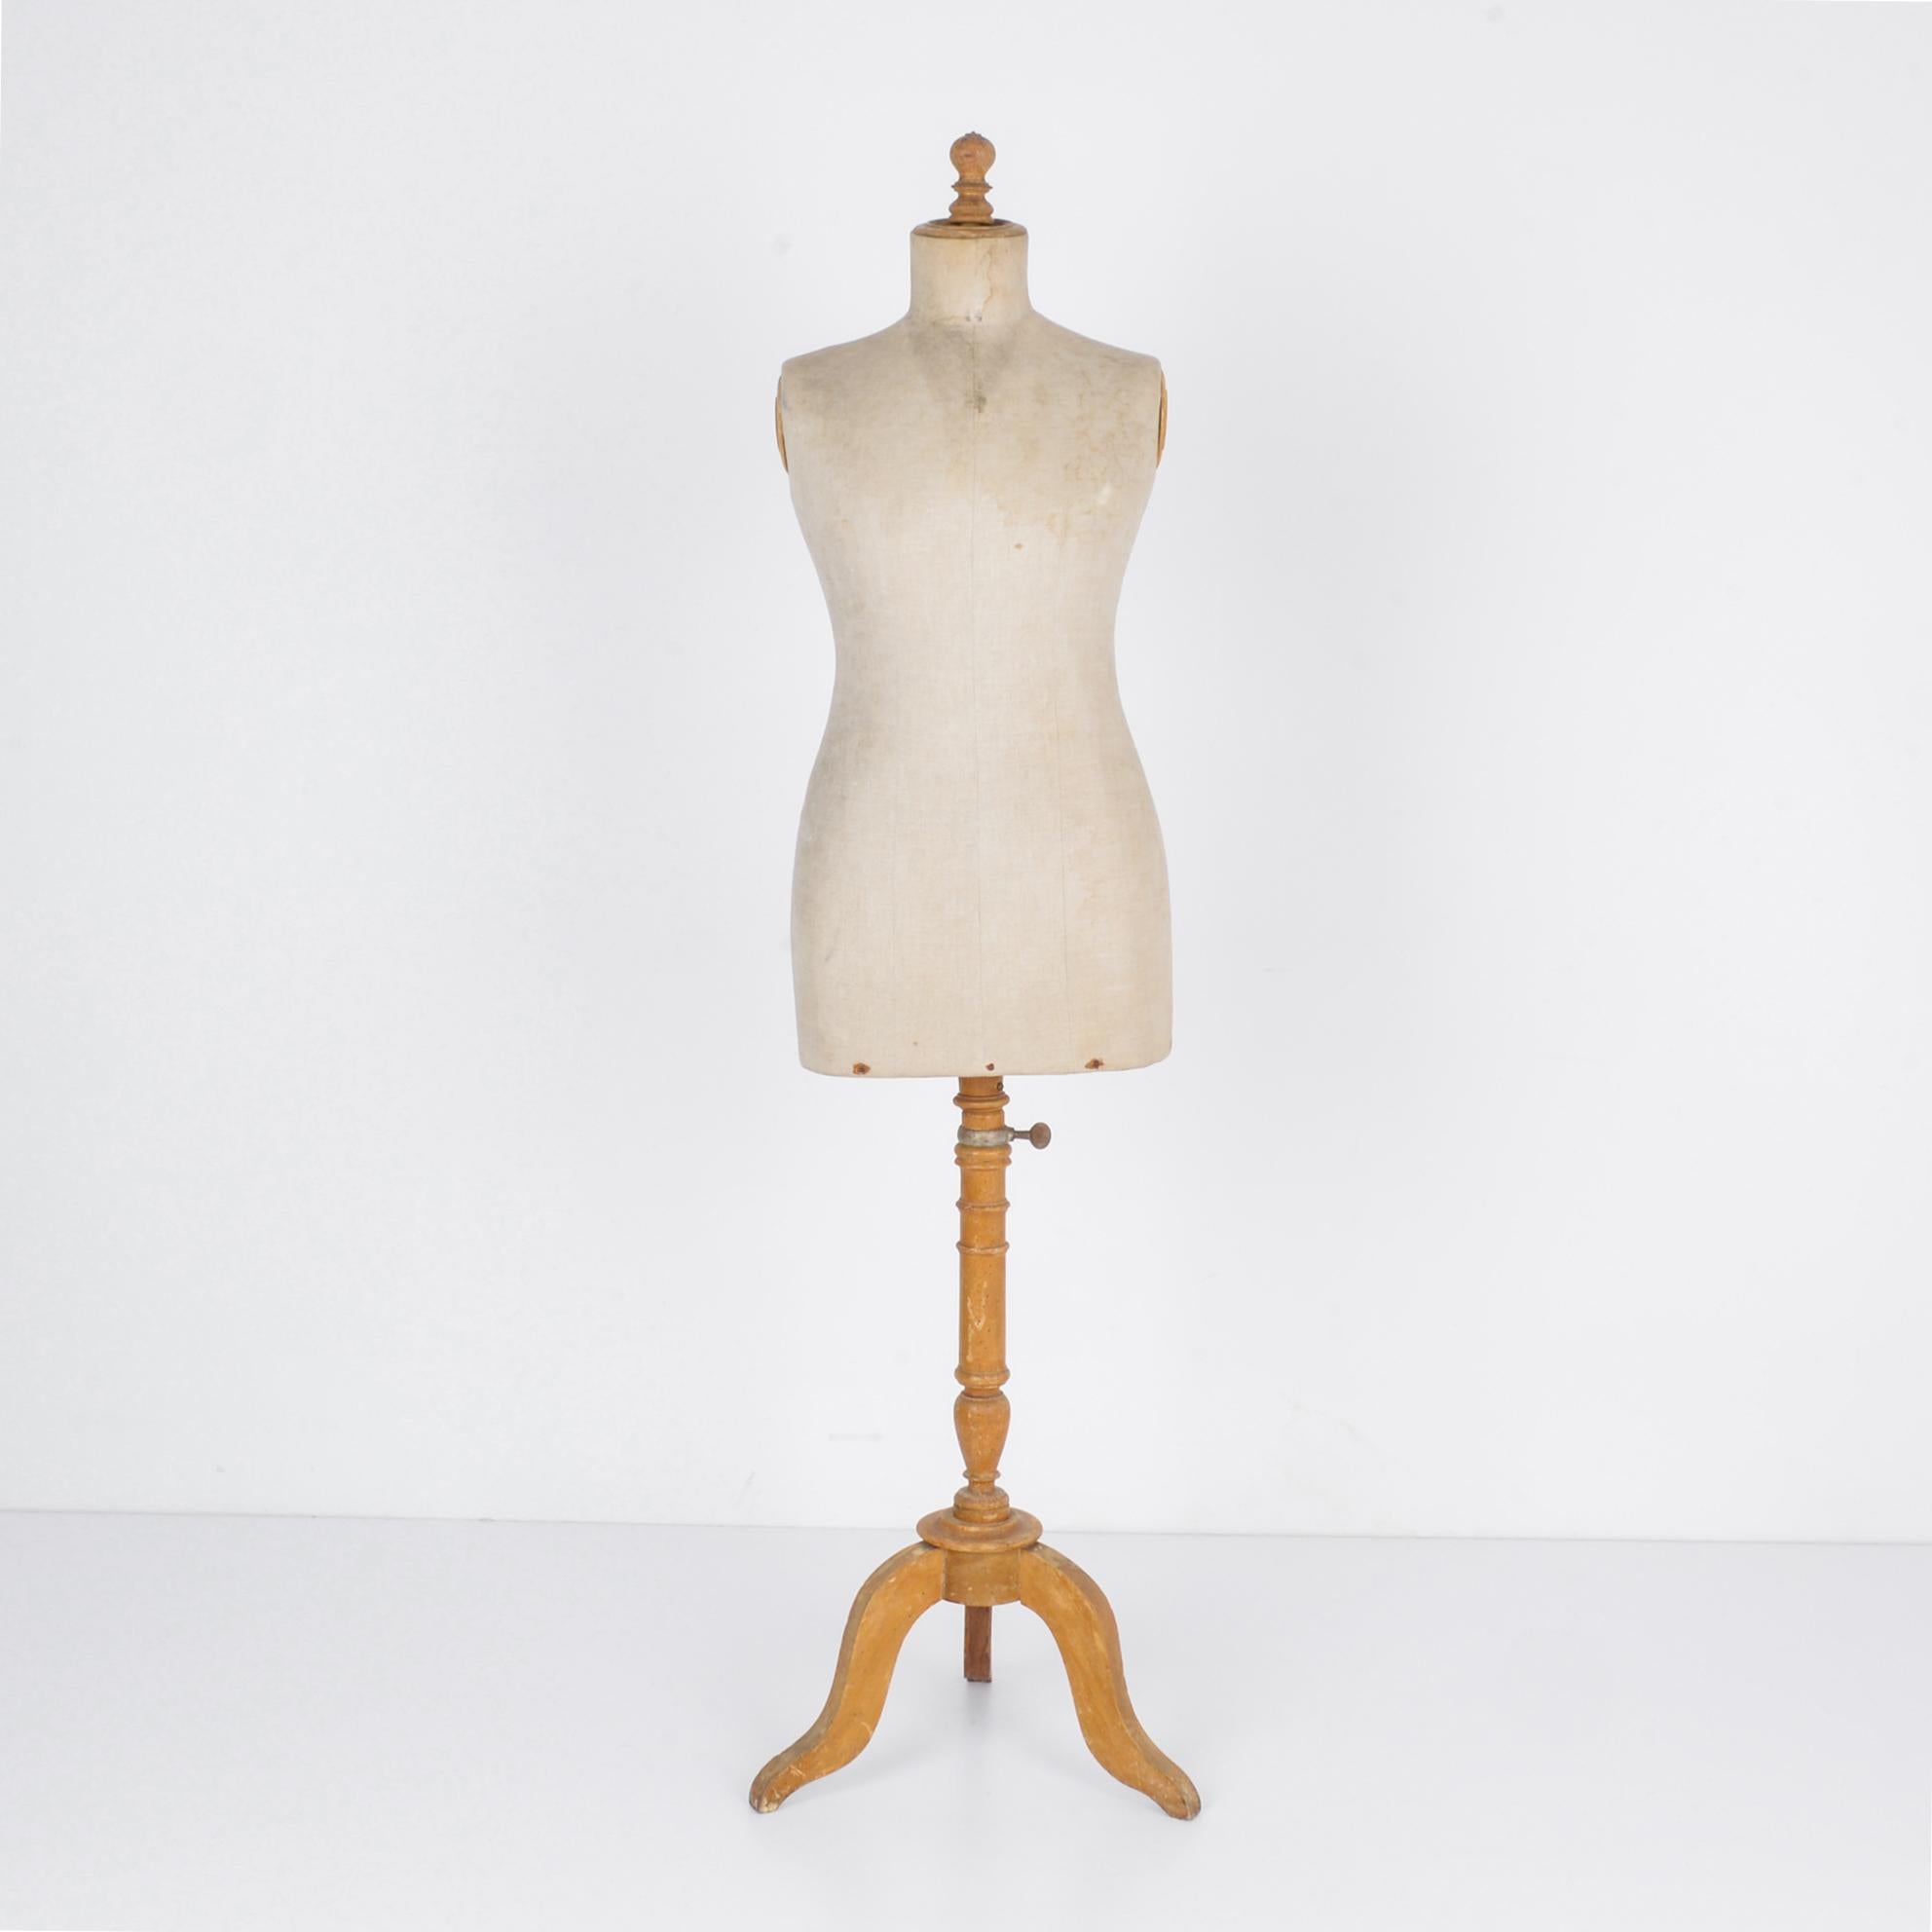 This wooden mannequin was made in France, circa 1880. It has a silhouette of a woman and features a turned stand and tripod base. The body is lined with time-worn linen, recalling the days of elaborate fittings and custom made clothing at a